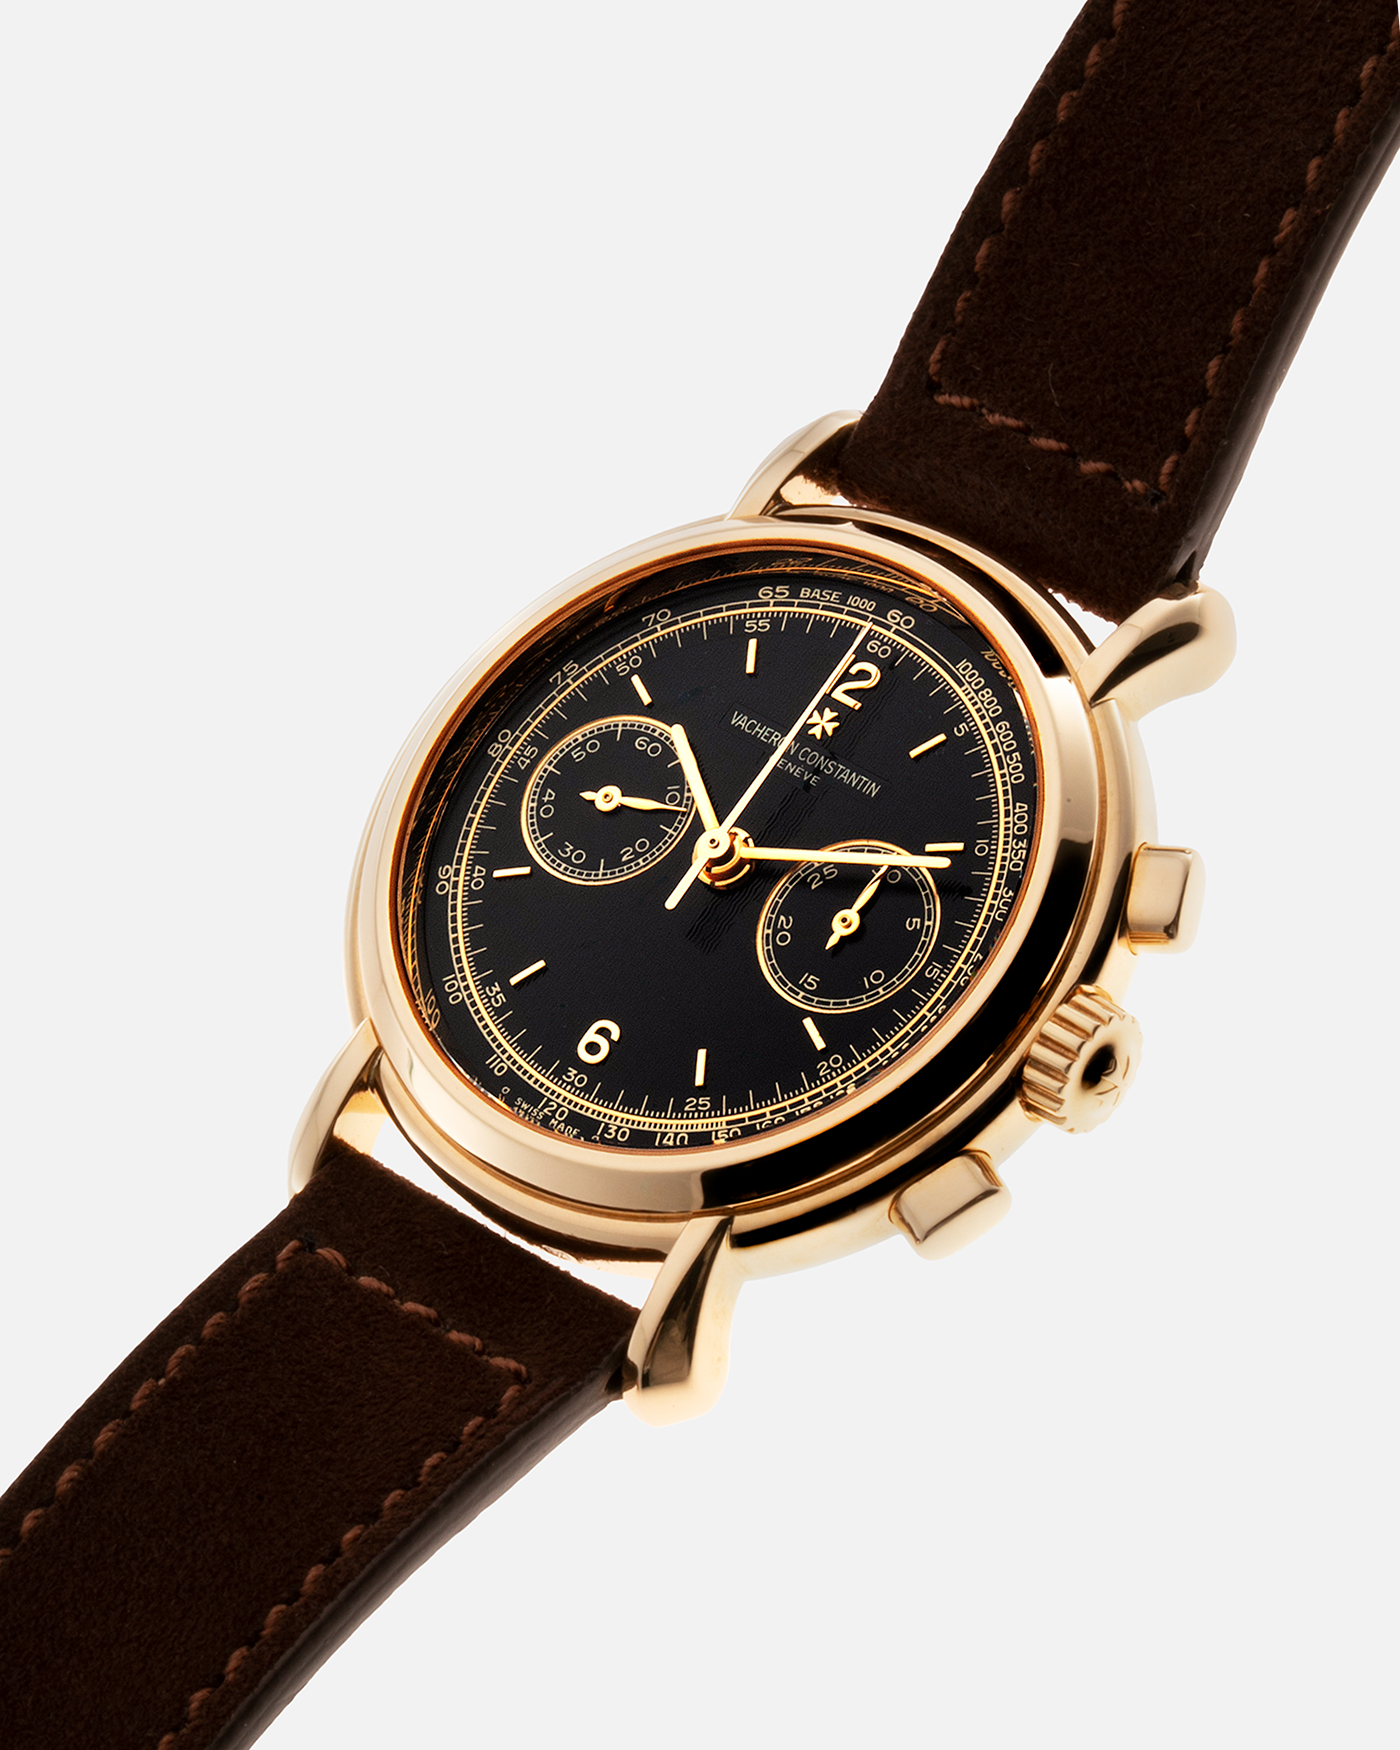 Brand: Vacheron Constantin Year: 2000's Model: Les Historiques Chronograph  Reference Number: 47101 Material: 18k Yellow Gold Movement: Lemania 2320 Based Cal. 1141 Case Diameter: 37mm Bracelet: Brown Suede with 18k Yellow Gold Tang Buckle